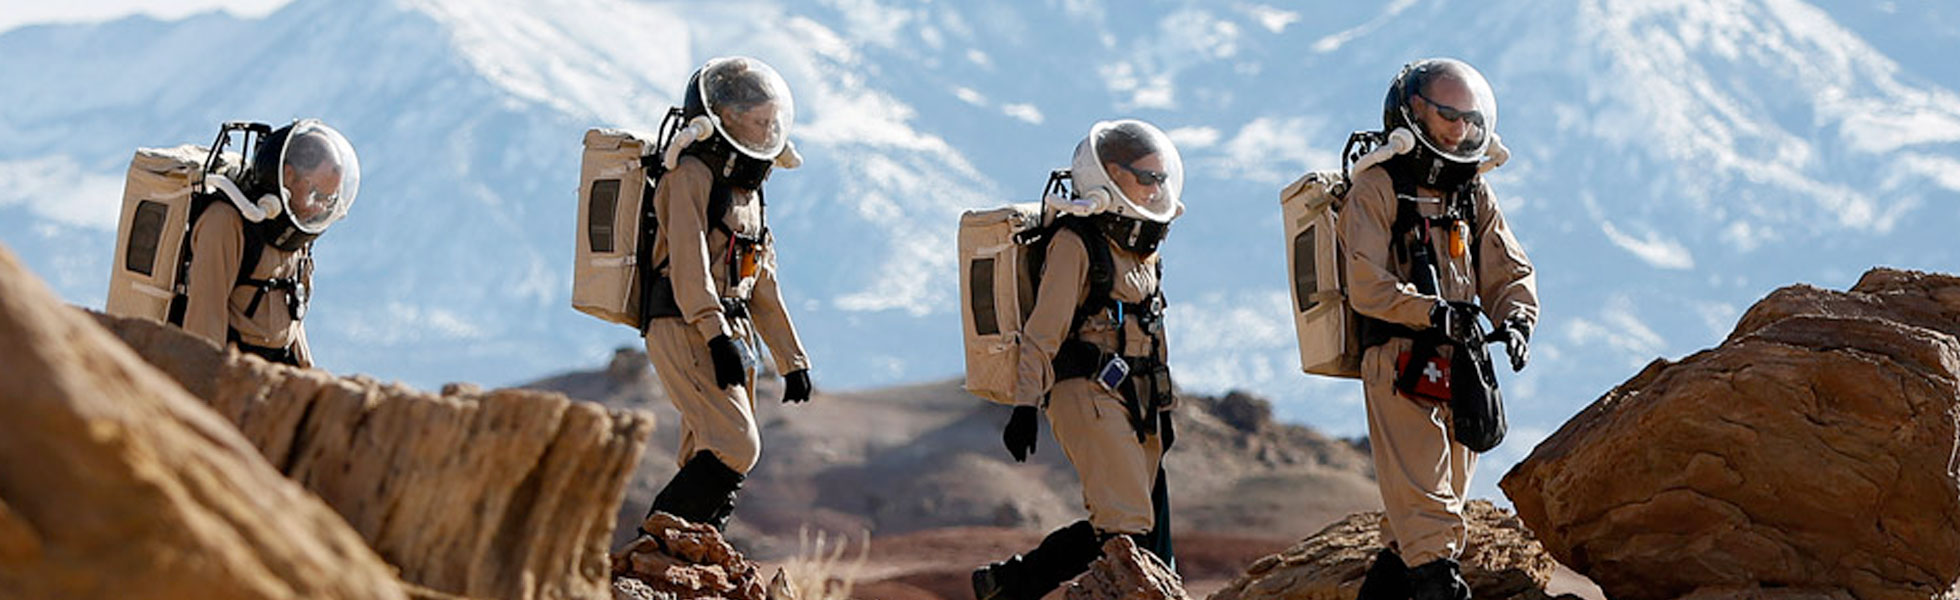 Western researchers wearing space suits crossing the desert